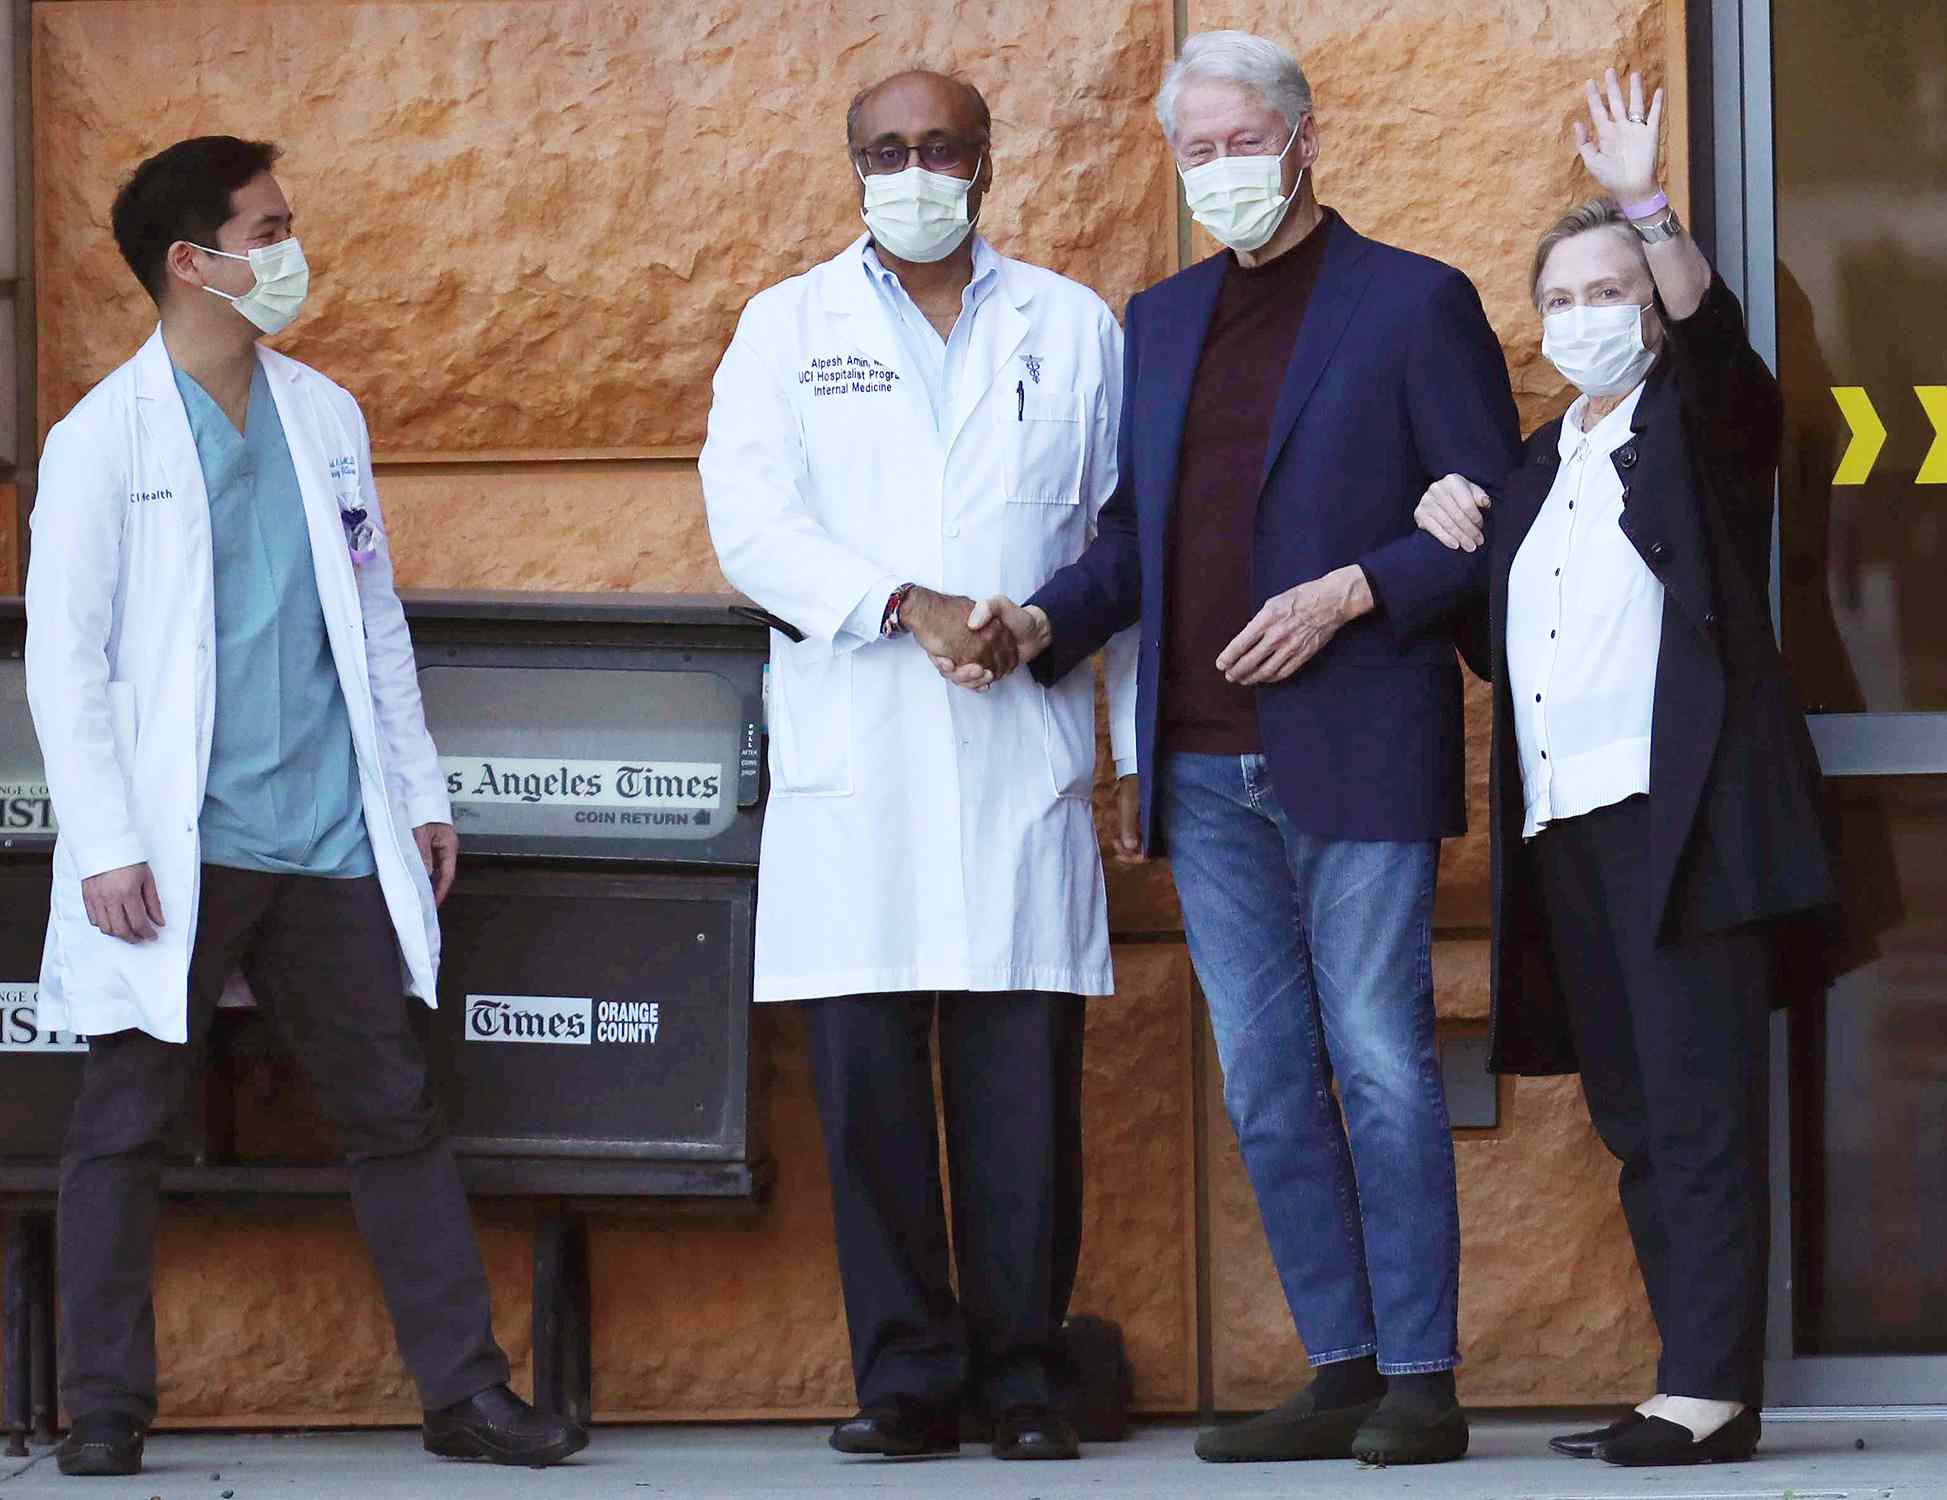 Former President Bill Clinton, standing with his wife, Hillary, was discharged from UC Irvine Medical Center Sunday morning, six days after he was admitted and treated for a urological and blood infection, Orange, California on October 17, 2021.